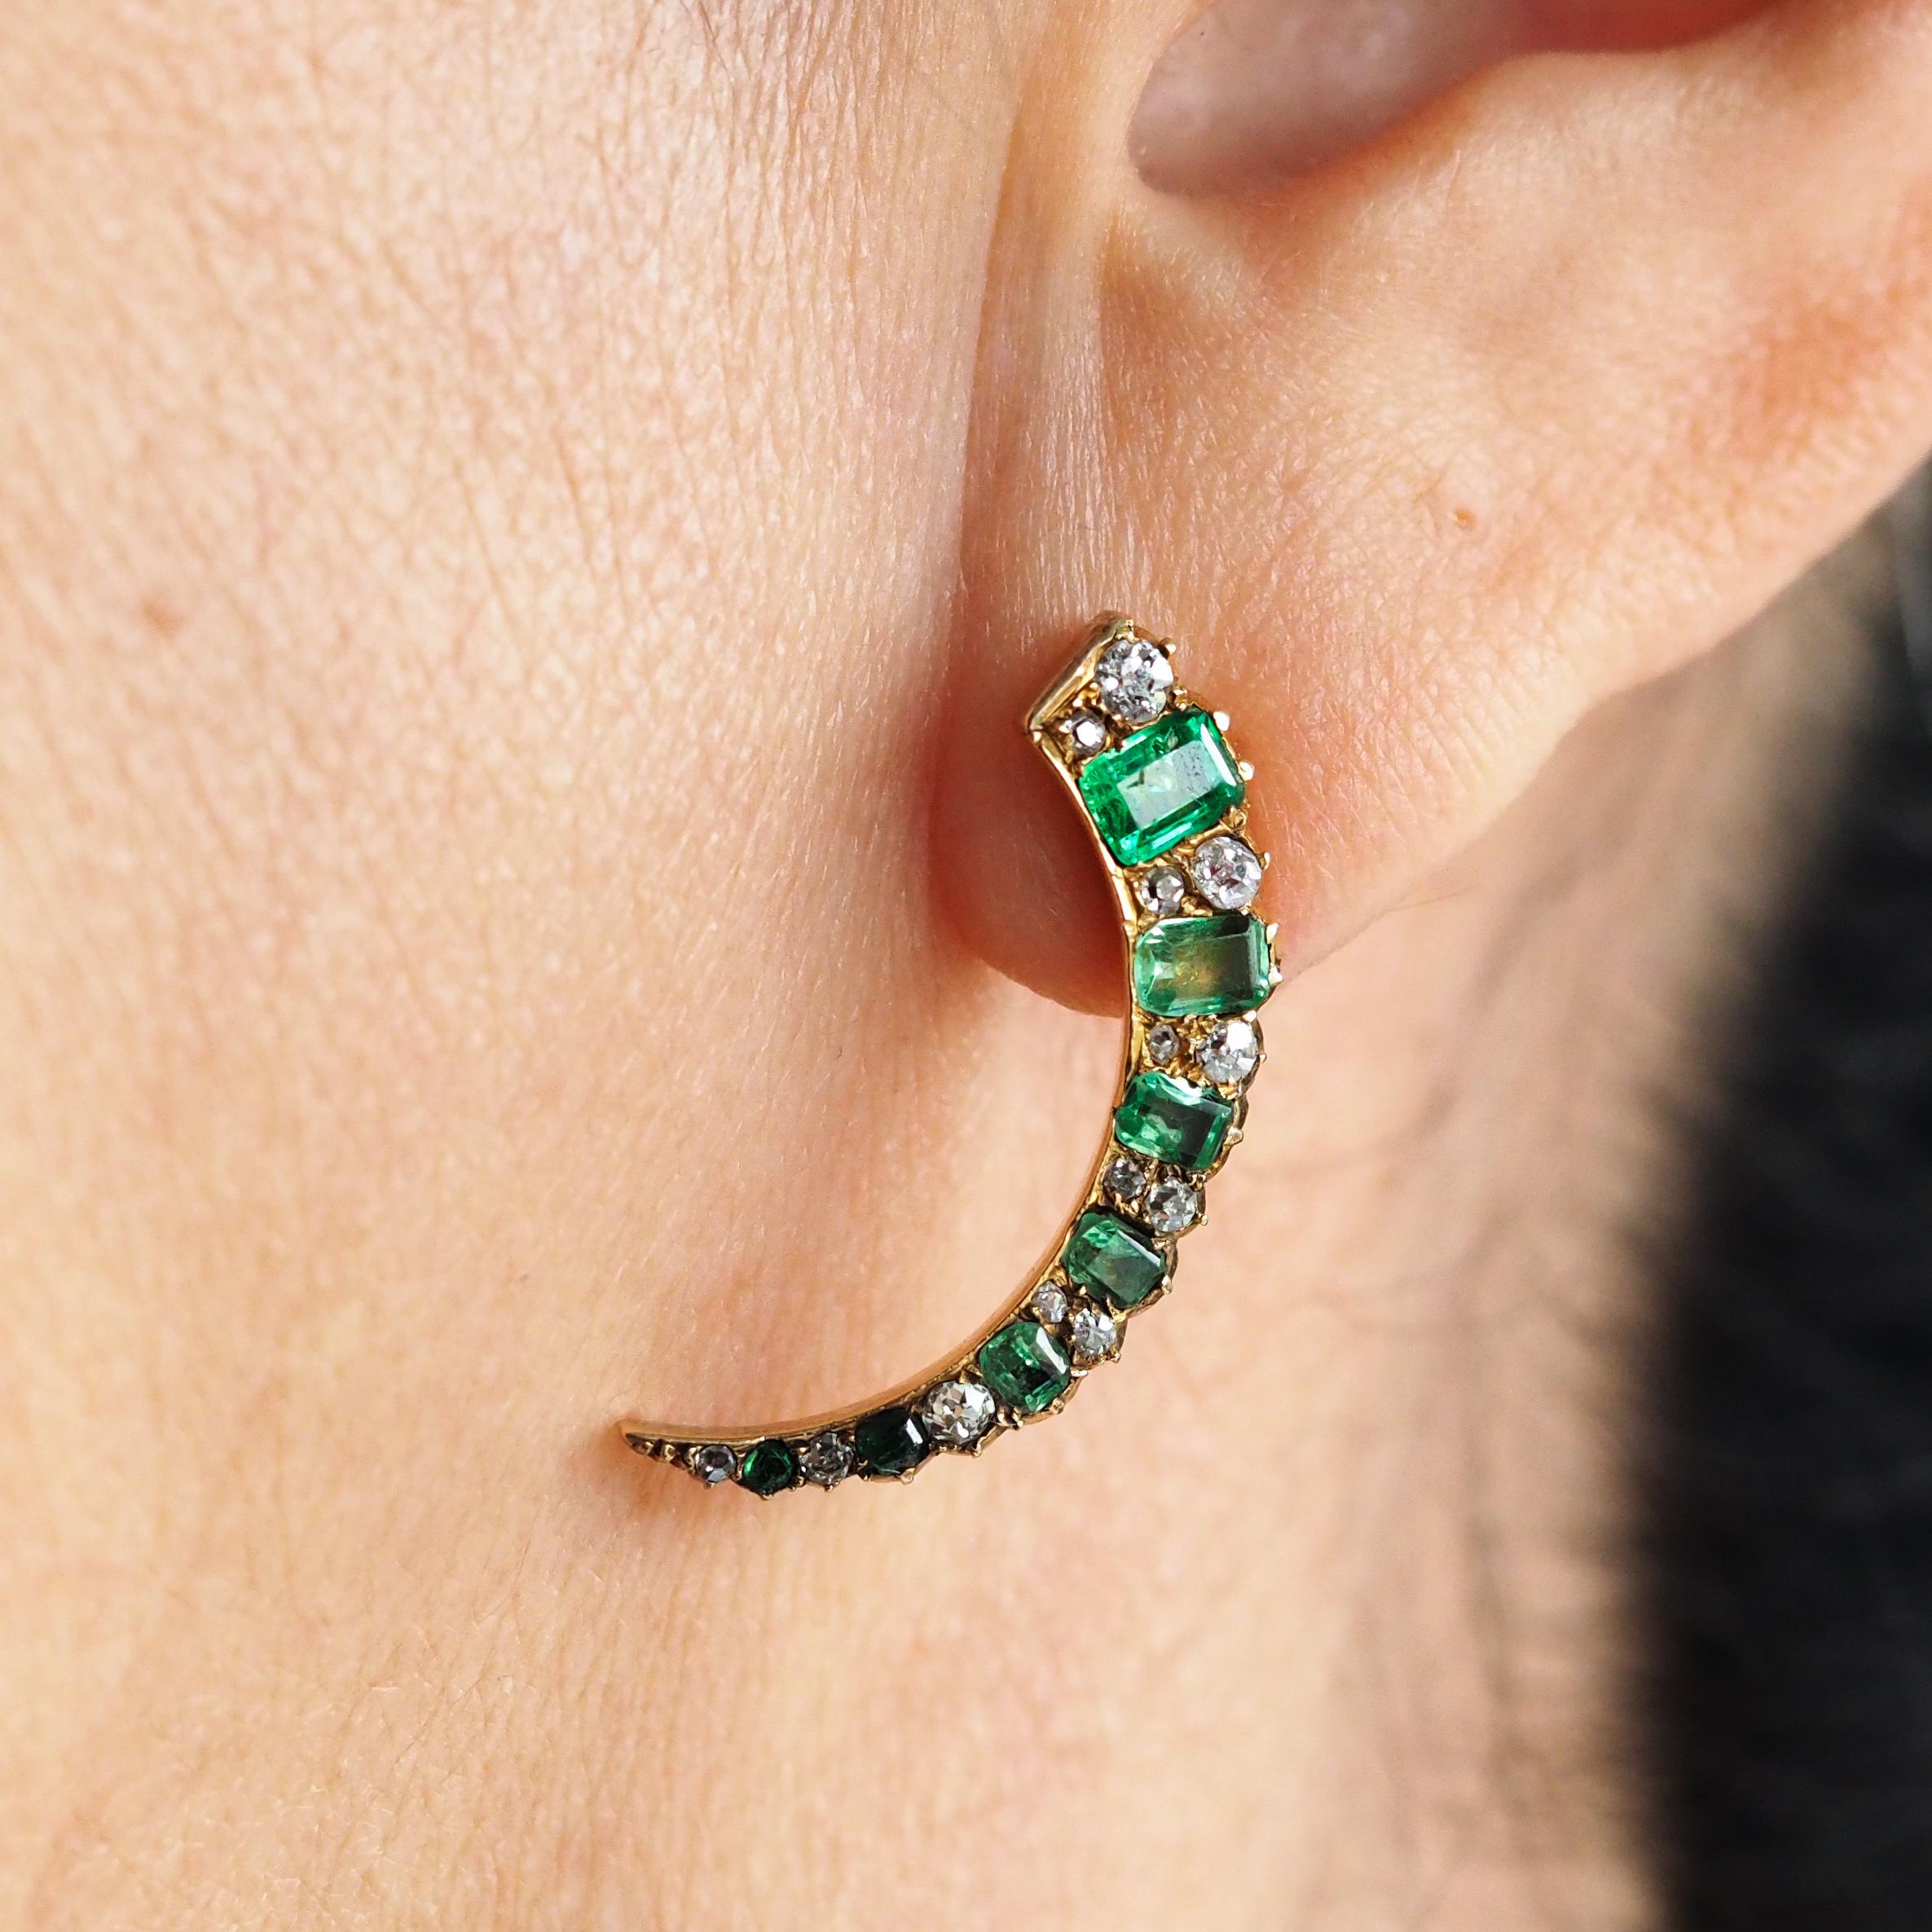 We are delighted to offer this stunning pair of antique Victorian 18ct gold emerald and diamond earrings, made c.1890.
 
Captivating upon first glance and enchanting with a celestial theme, this pair most certainly combines all the best elements of